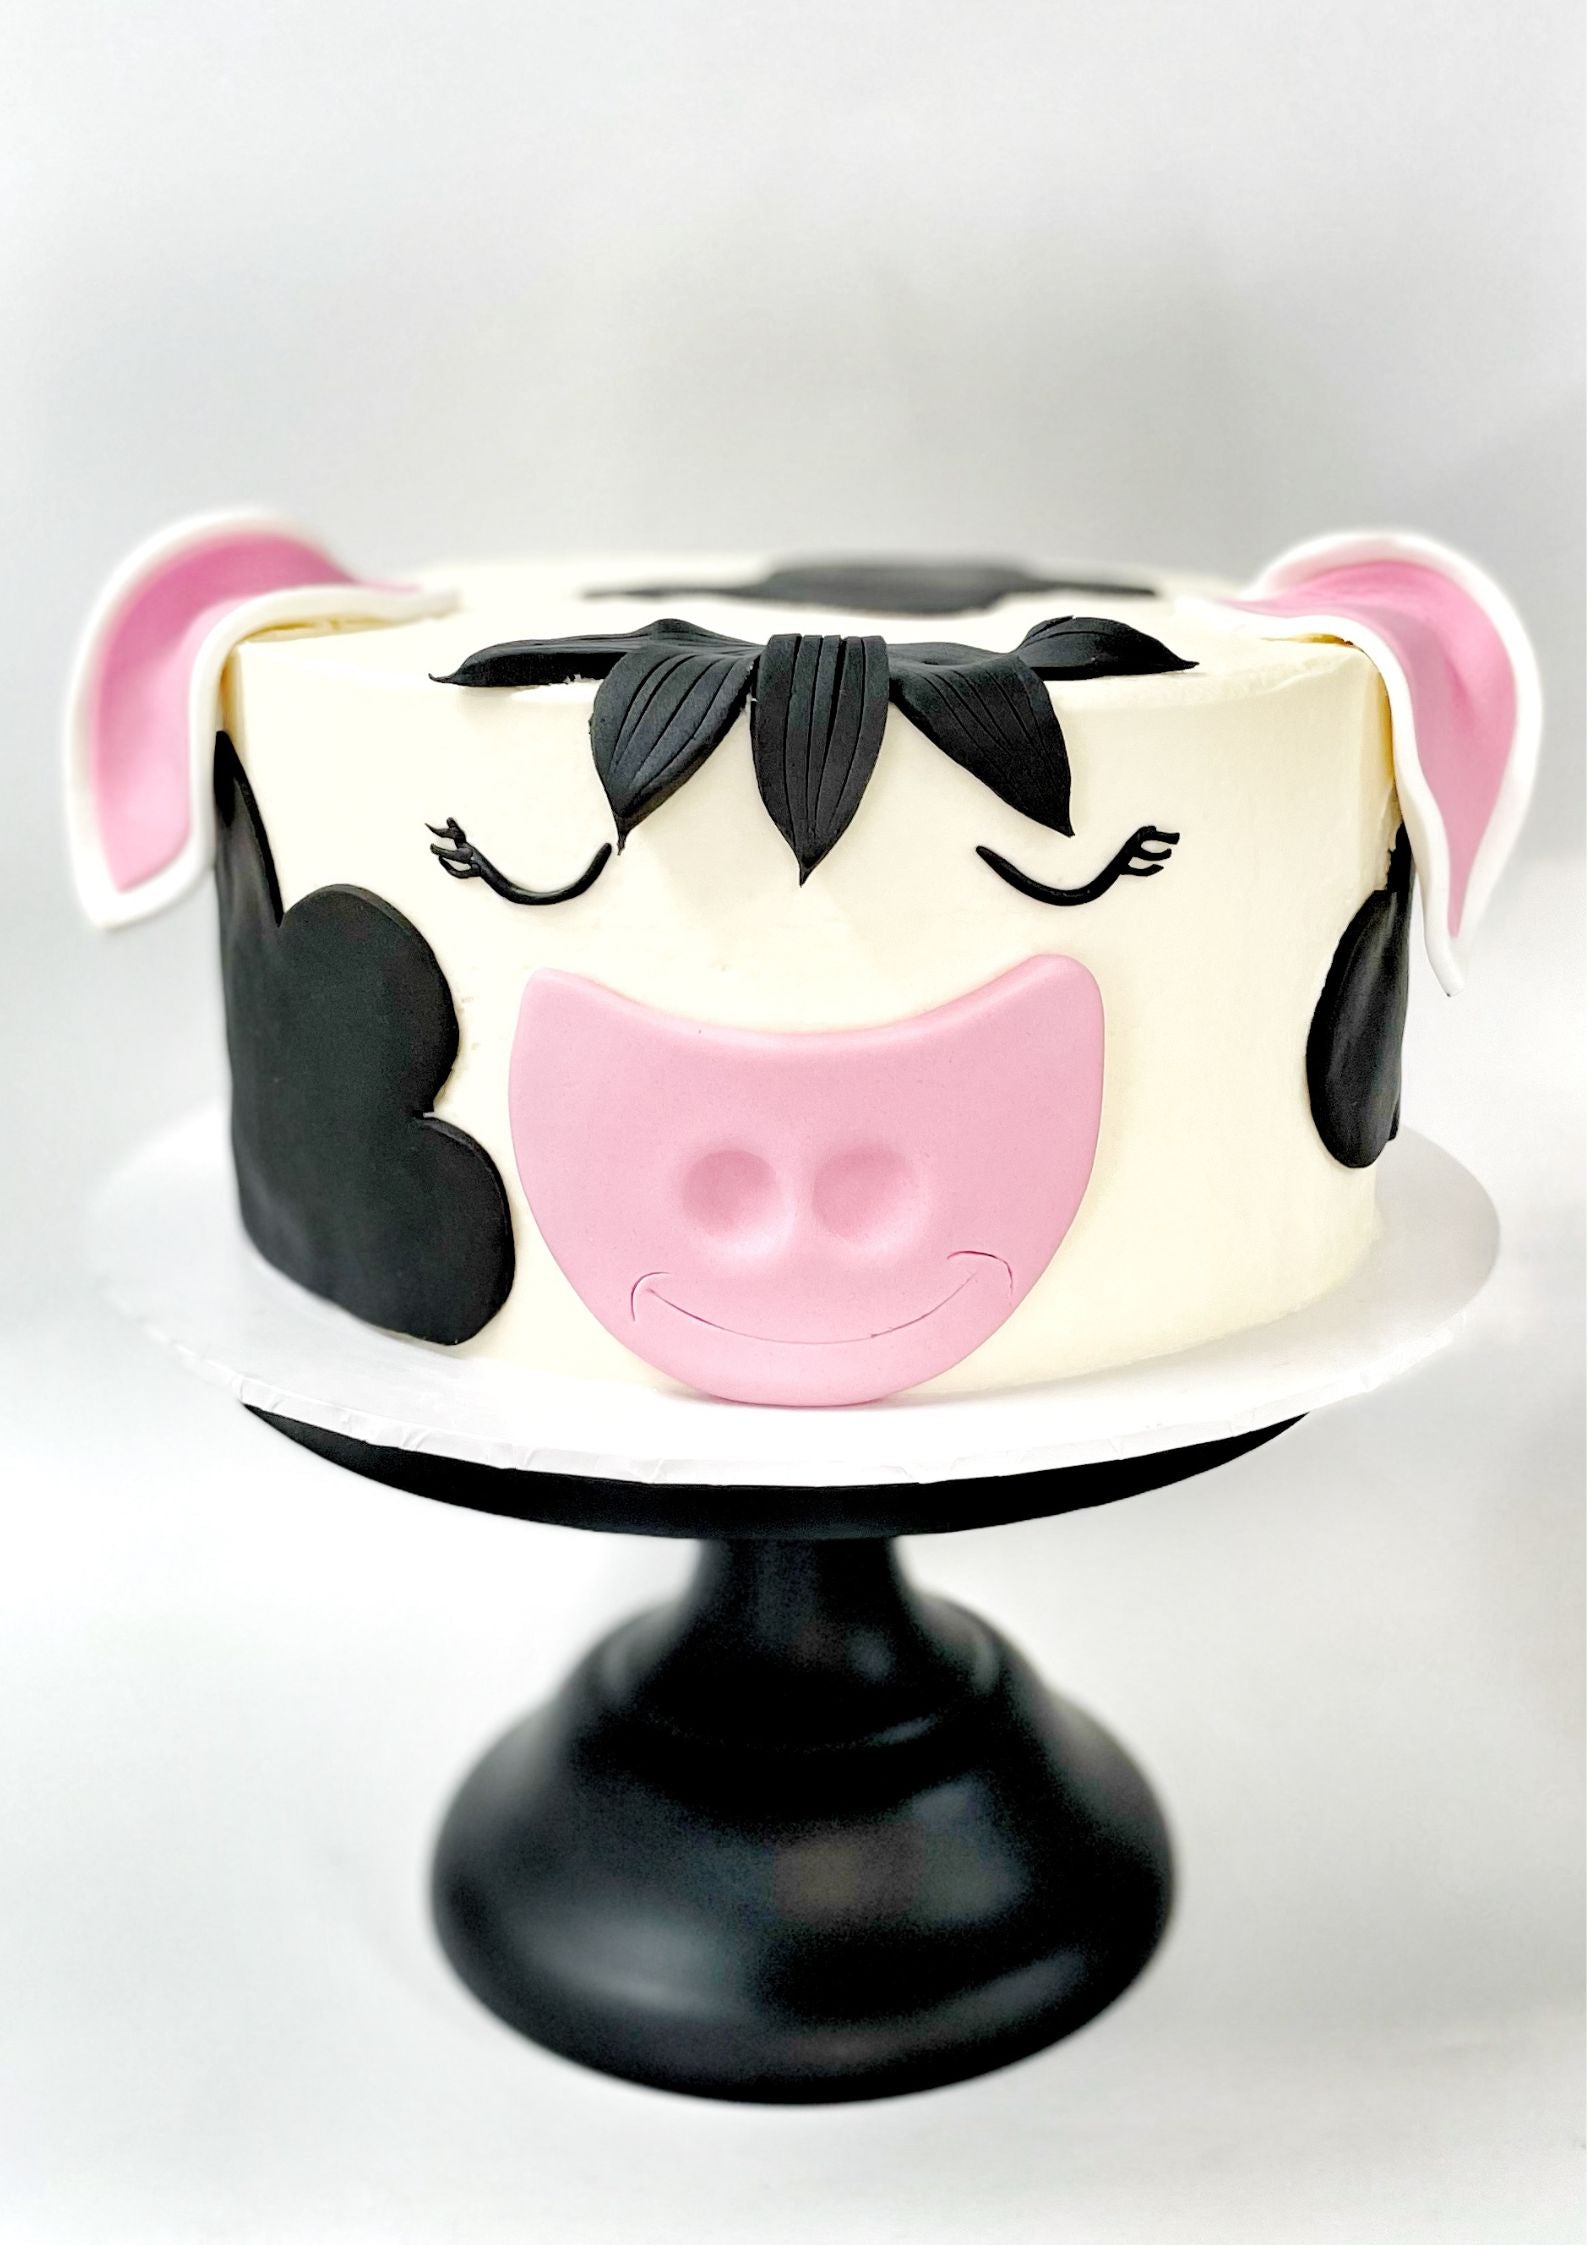 Daisy Cow DIY Cake Kit - Make the Cutest Cow Cake At Home! – Clever Crumb